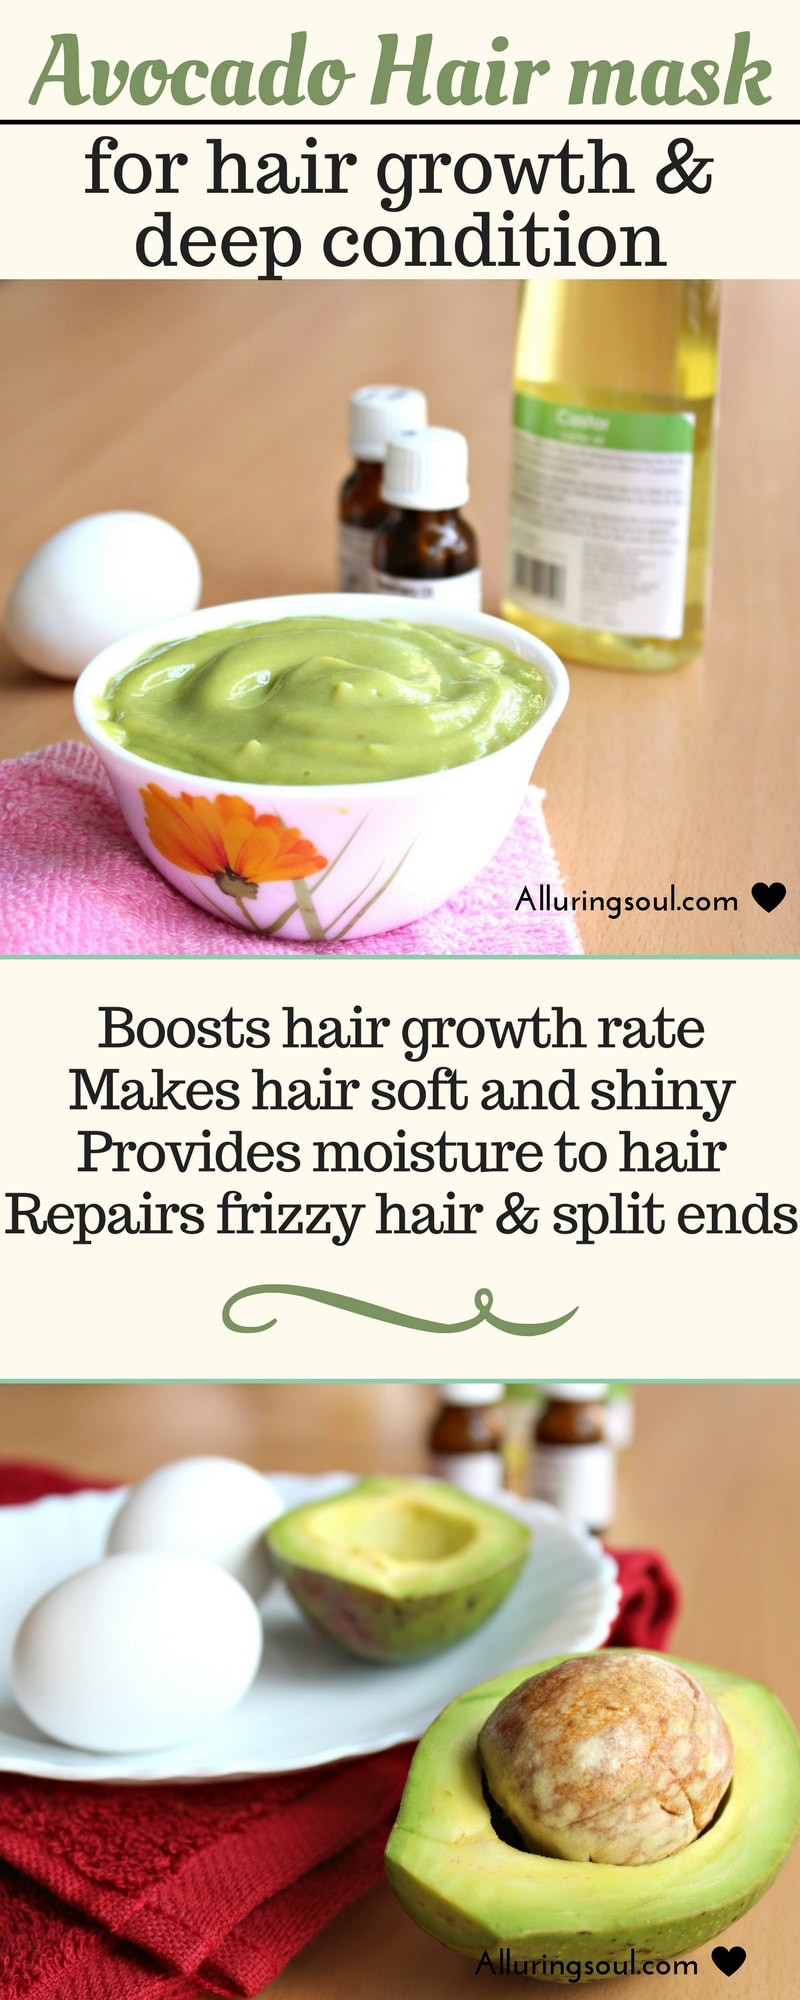 DIY Hair Mask For Dry Curly Hair
 The Best DIY Avocado Mask For Curls